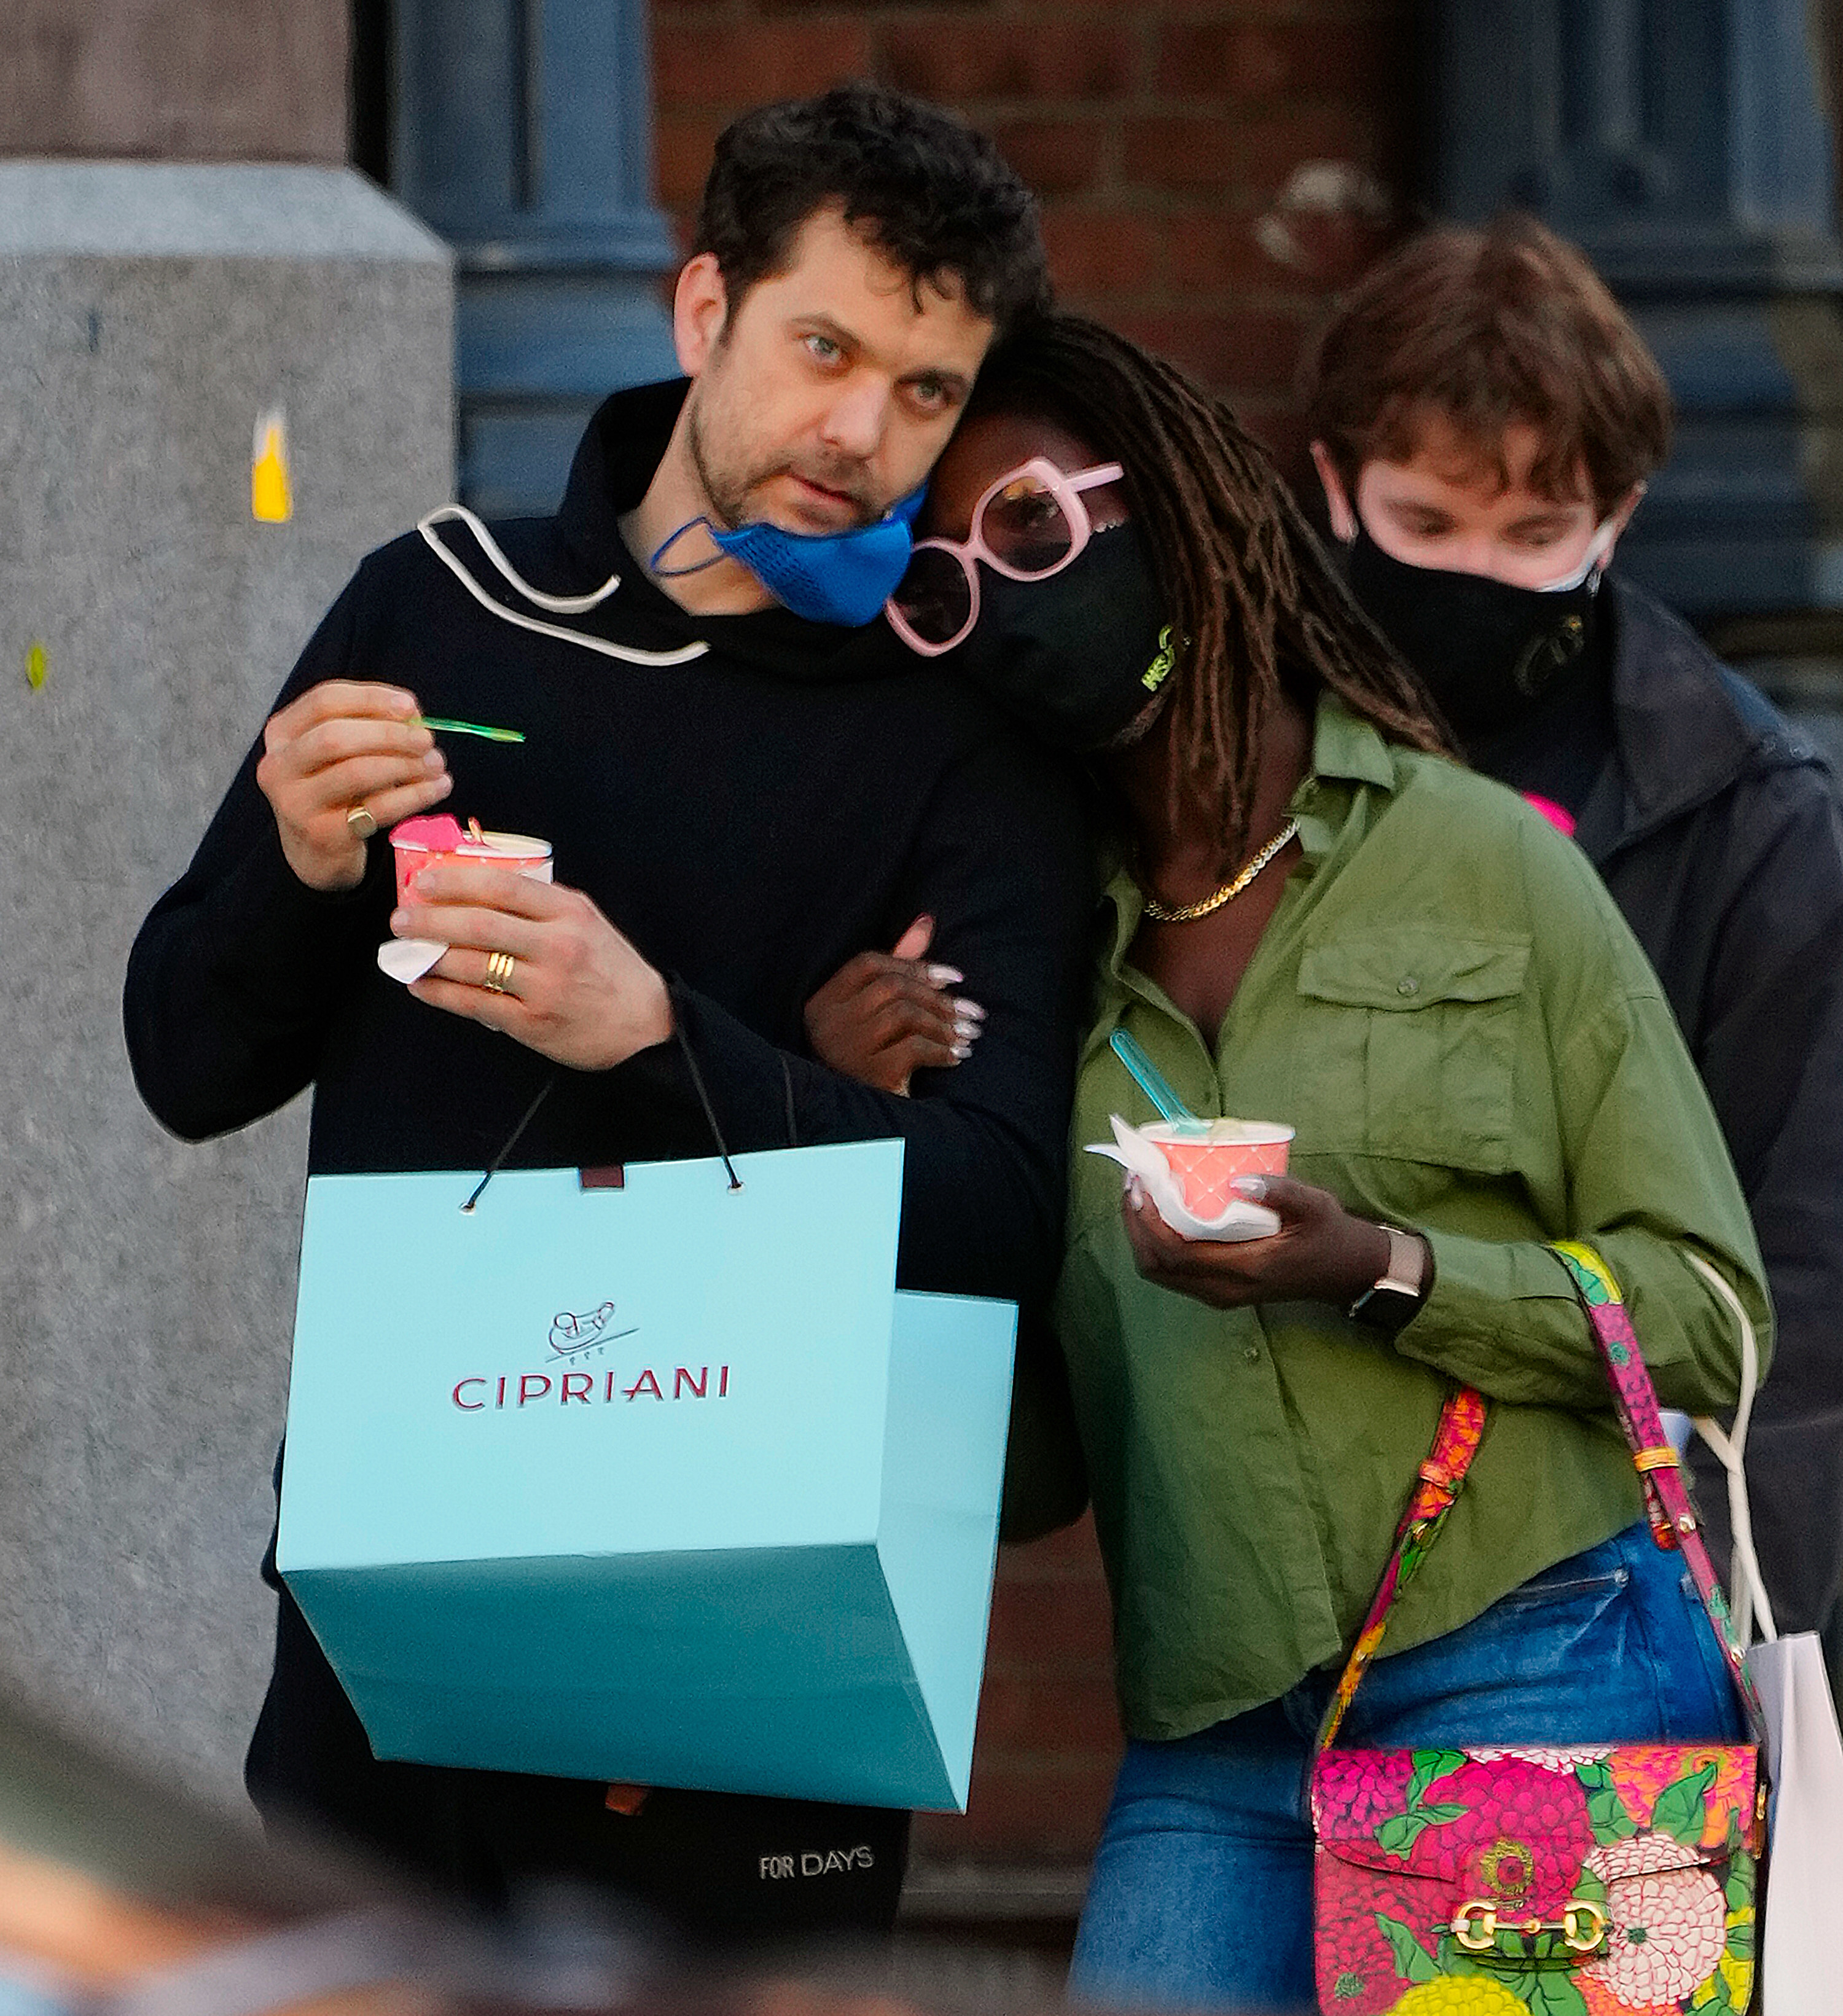 Joshua Jackson and Jodie Turner-Smith are photographed walking in New York City